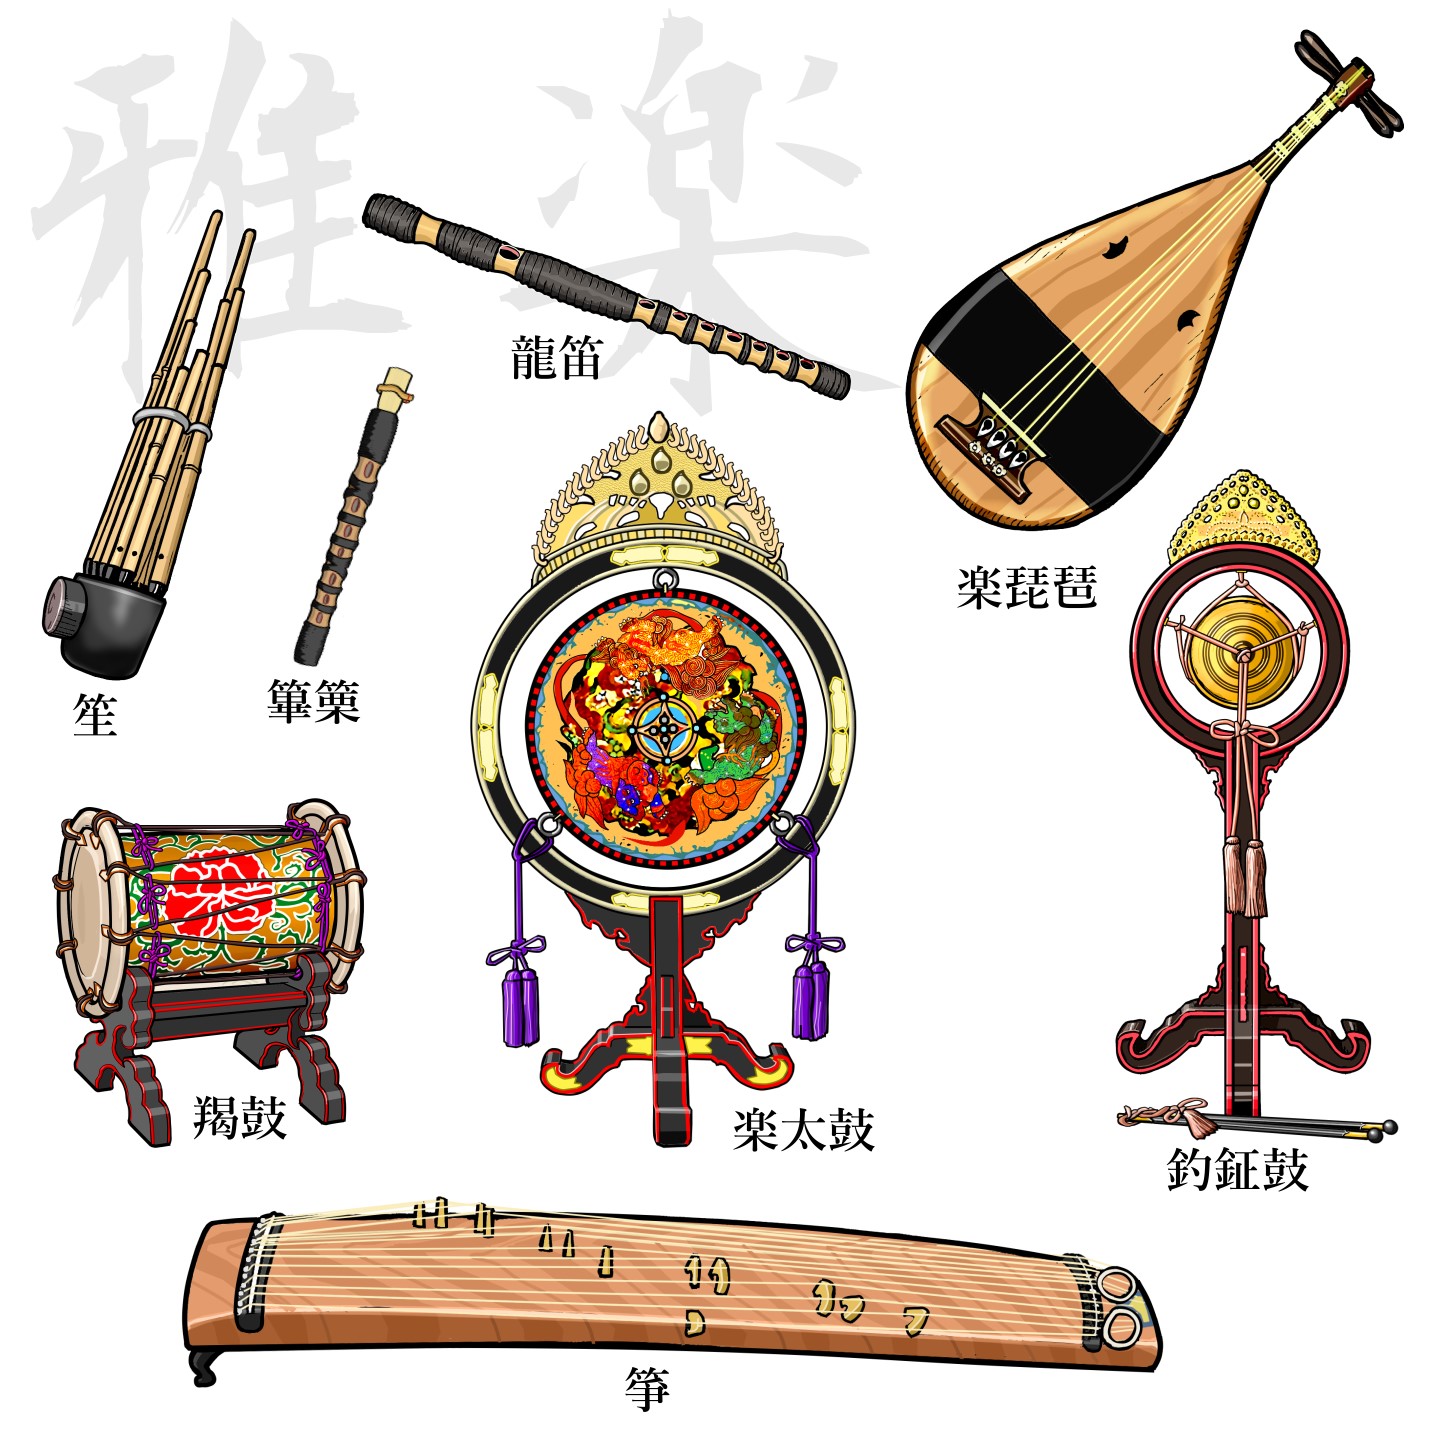 yŎgĂy instruments used in Gagaku orchestra